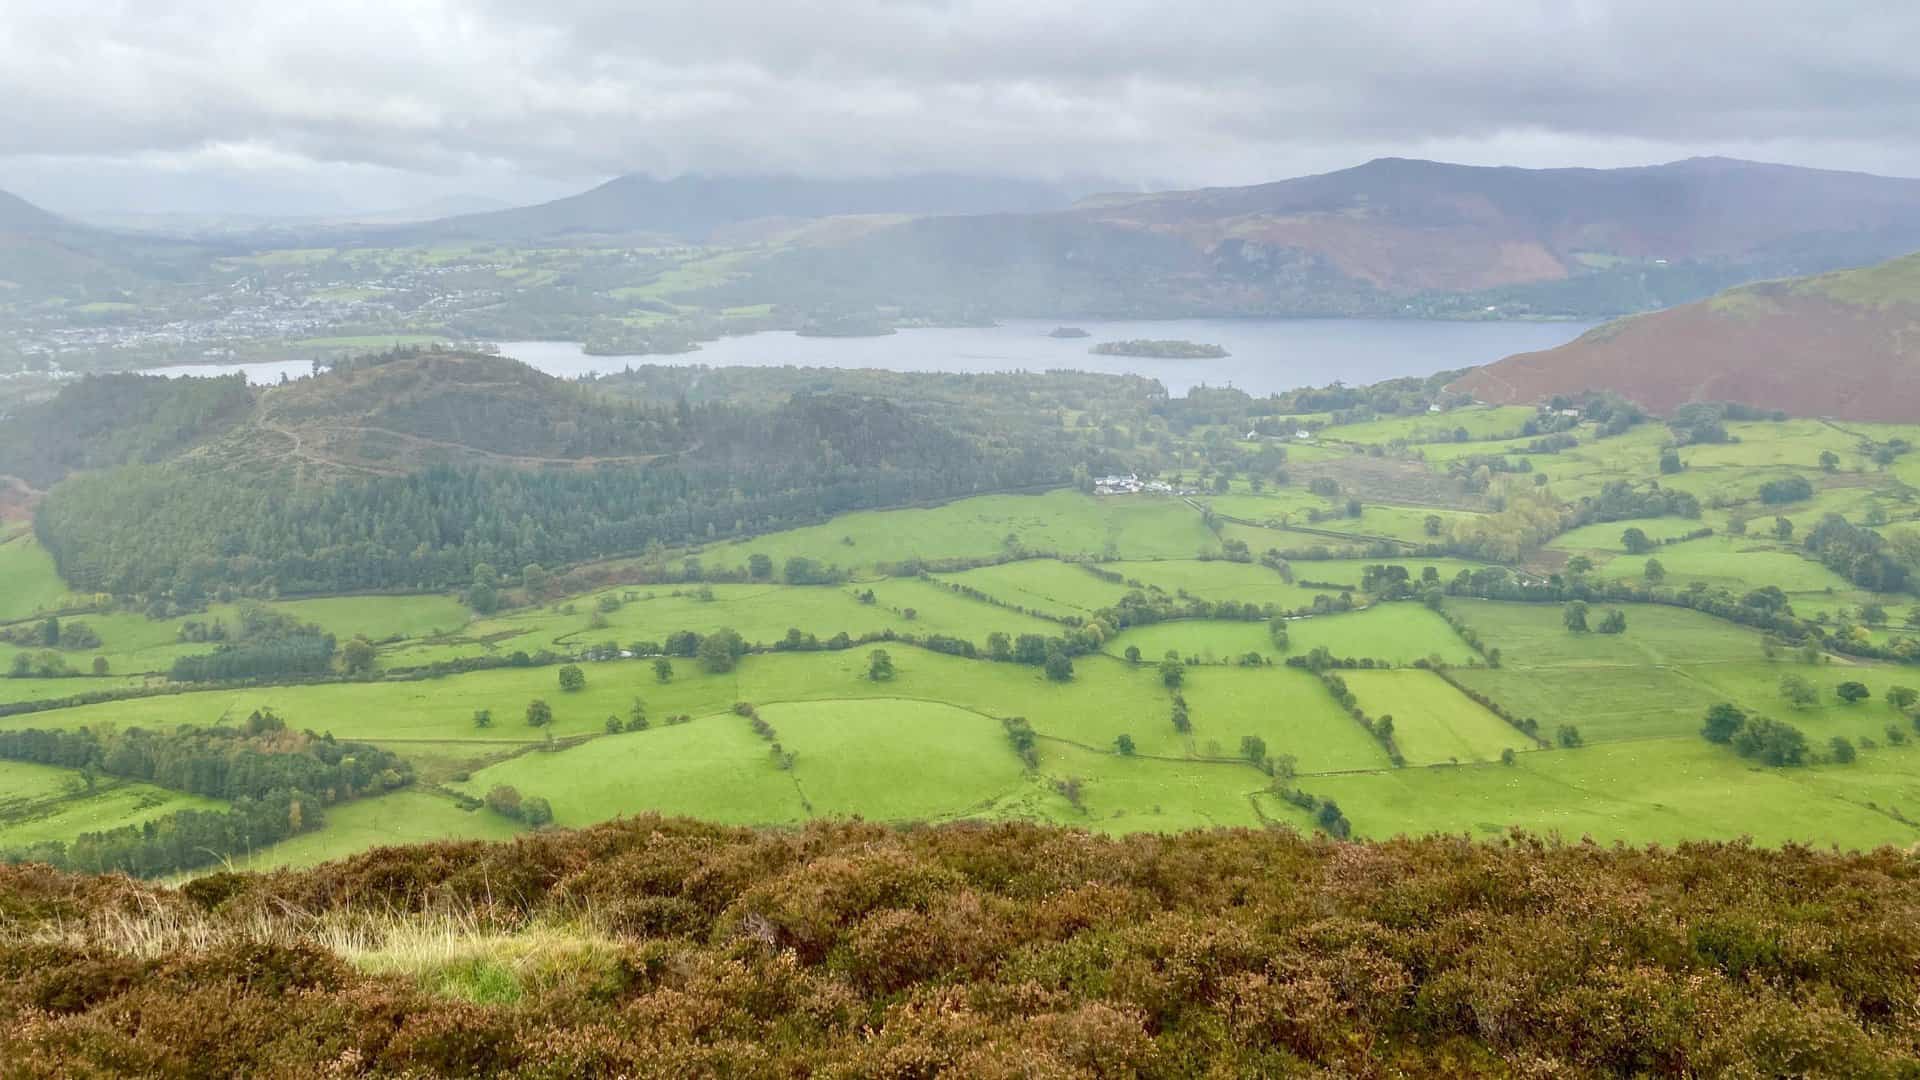 The Newlands valley and Derwent Water. The wooded hill on the left is Swinside, with Keswick in the background.